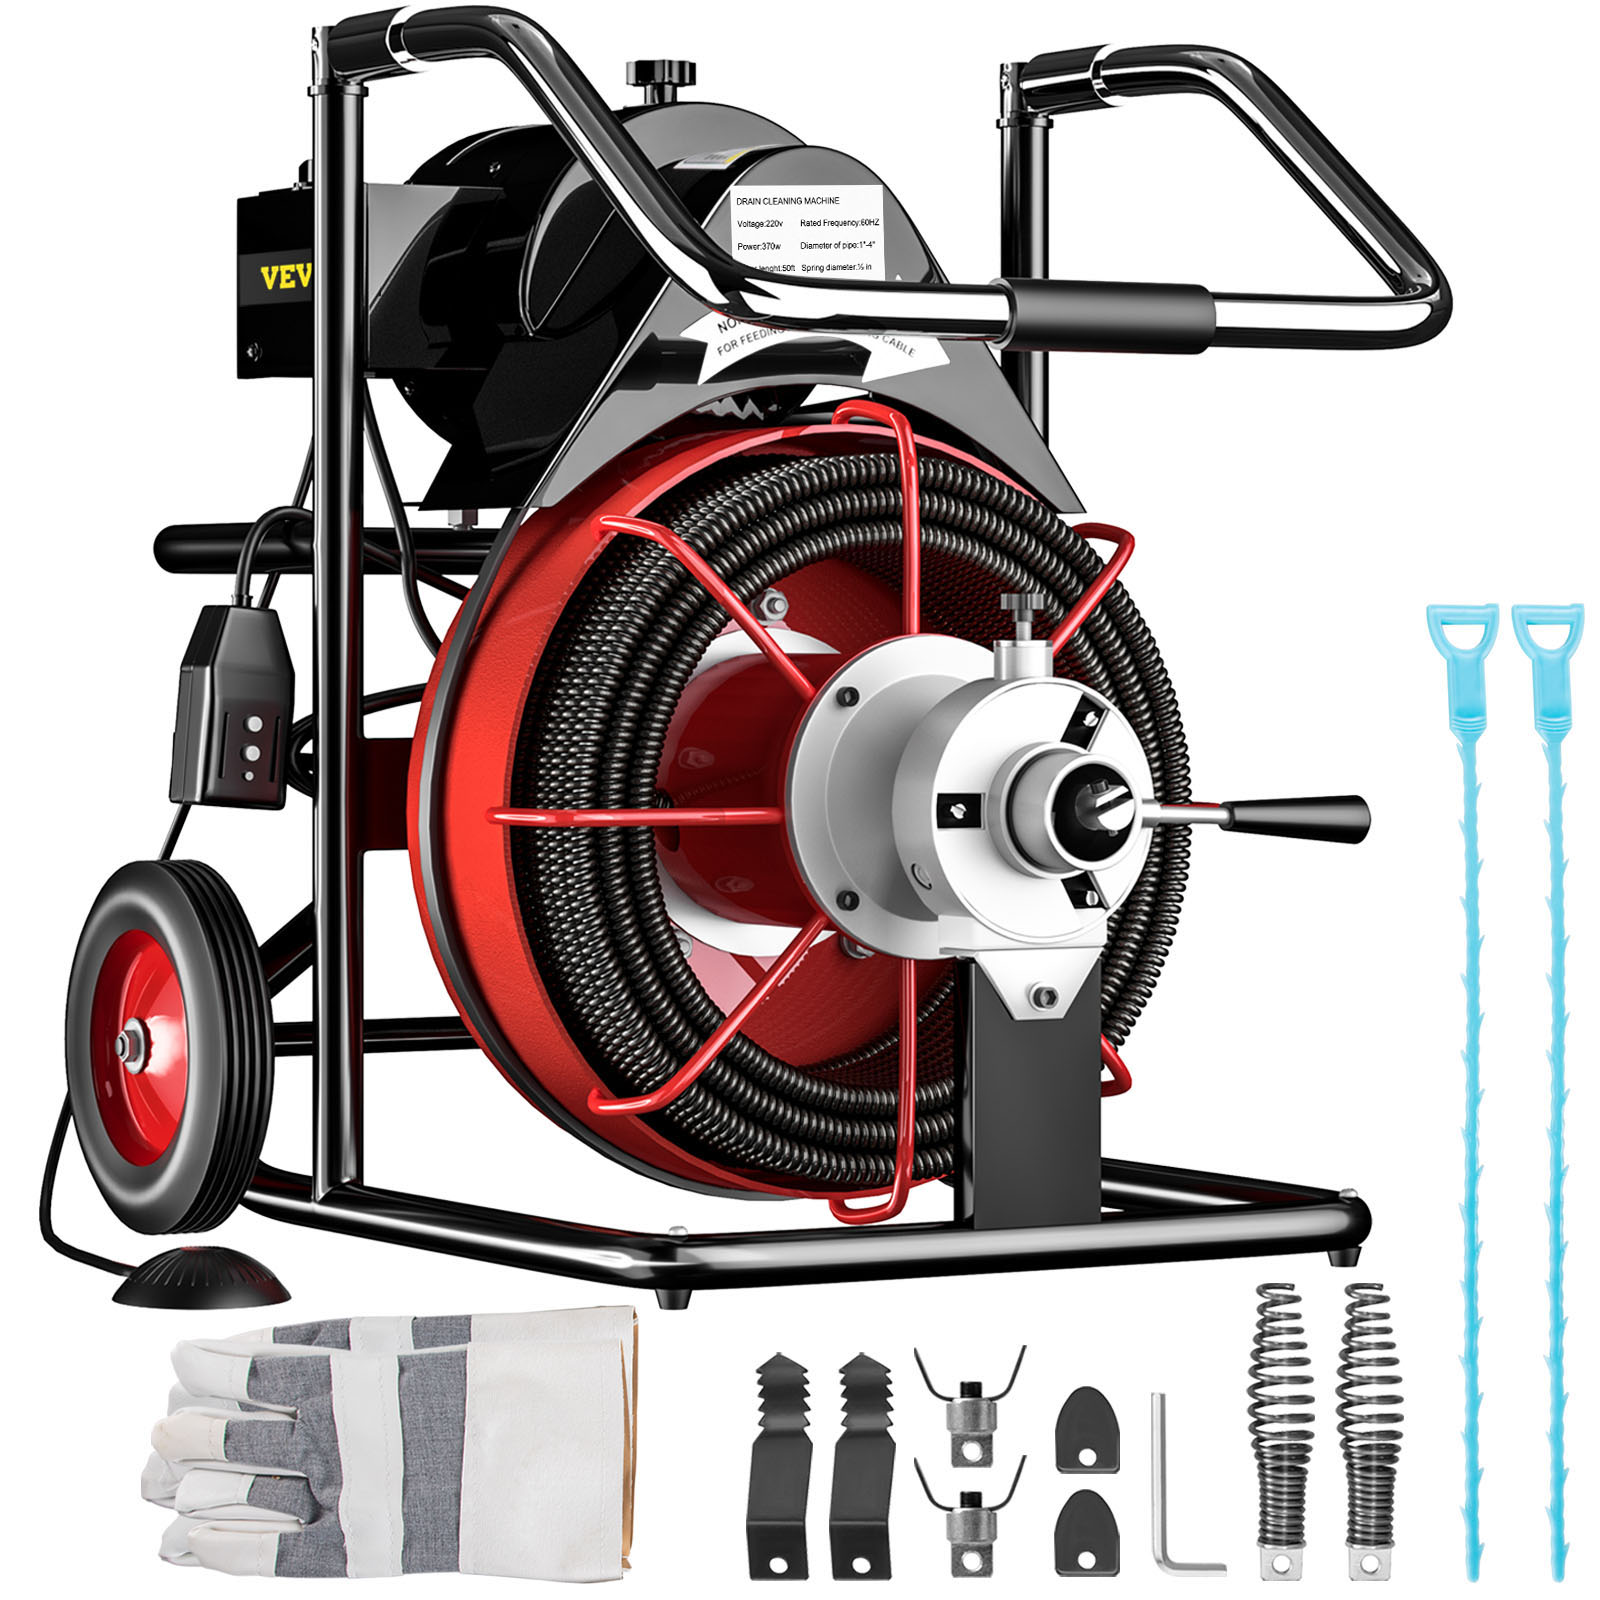 50' X 1/2" Drain Cleaning Machine Drum Auger Drain Cleaner 370w Plumbing Tools от Vevor Many GEOs